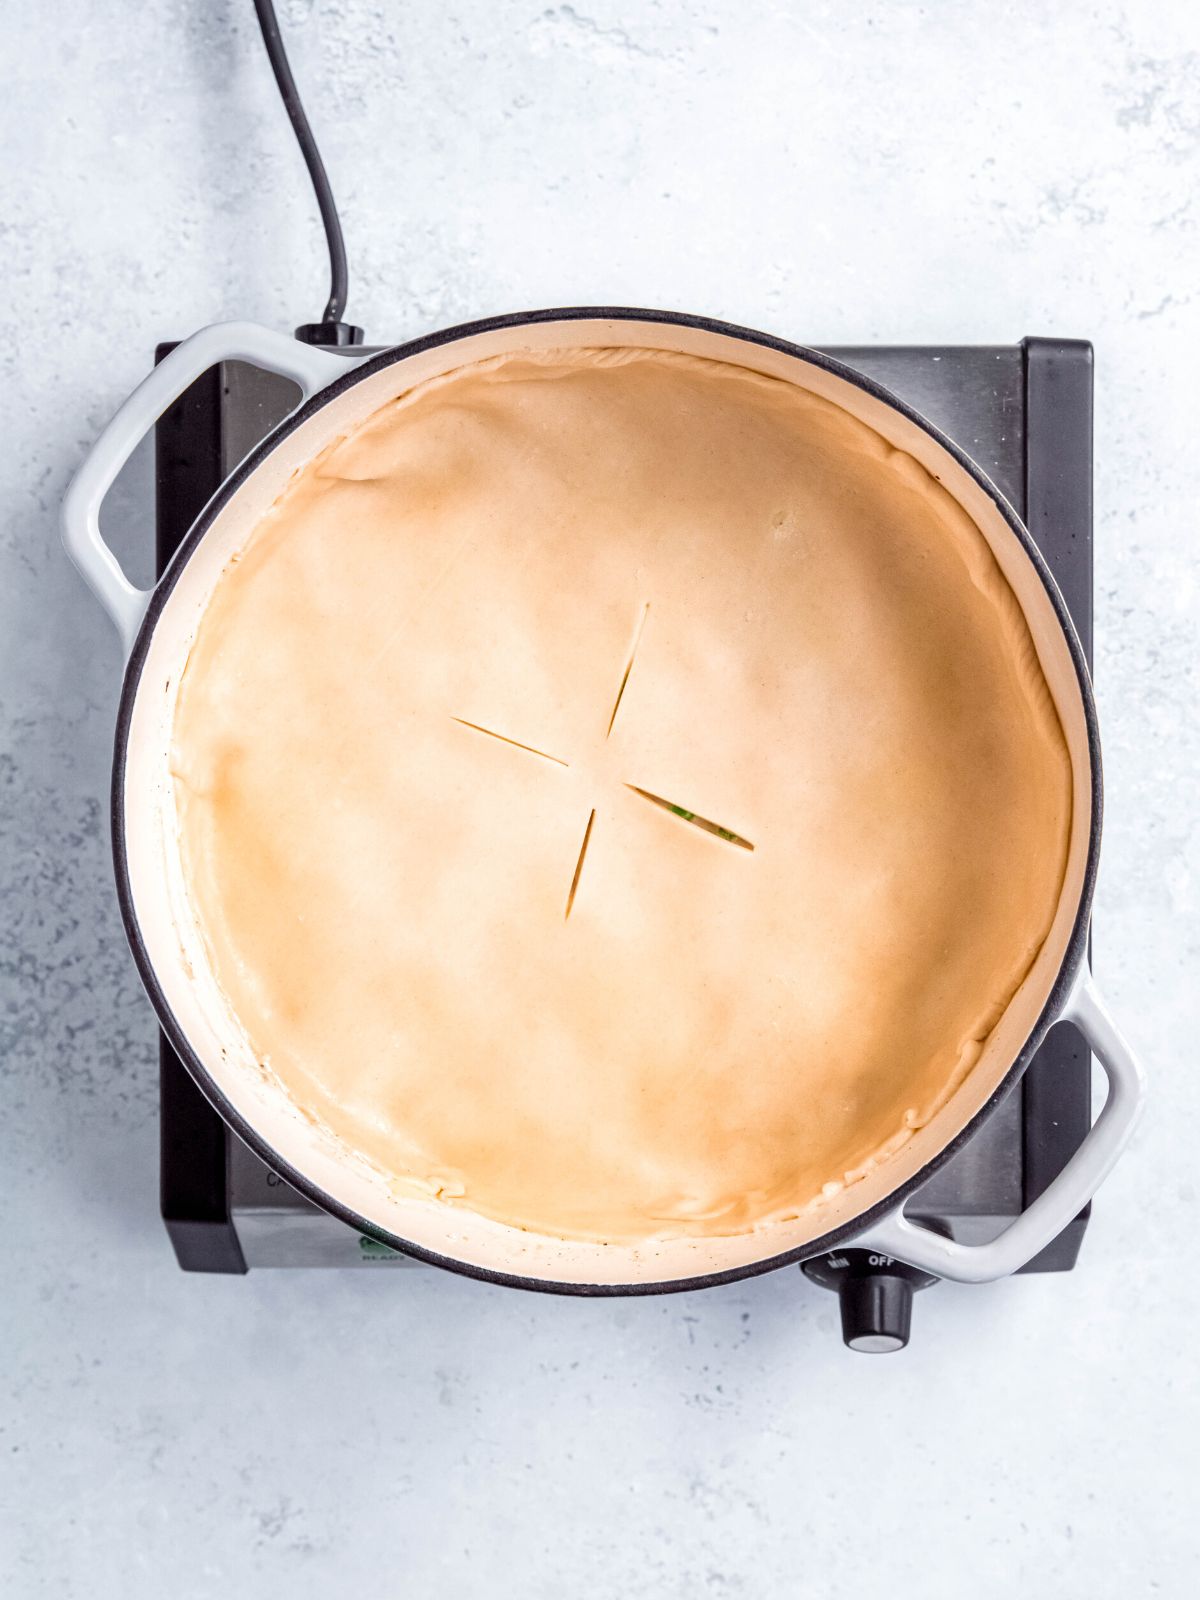 pastry crust added to the top of the pot pie gravy in the dutch oven and pressed to the sides to seal before baking.